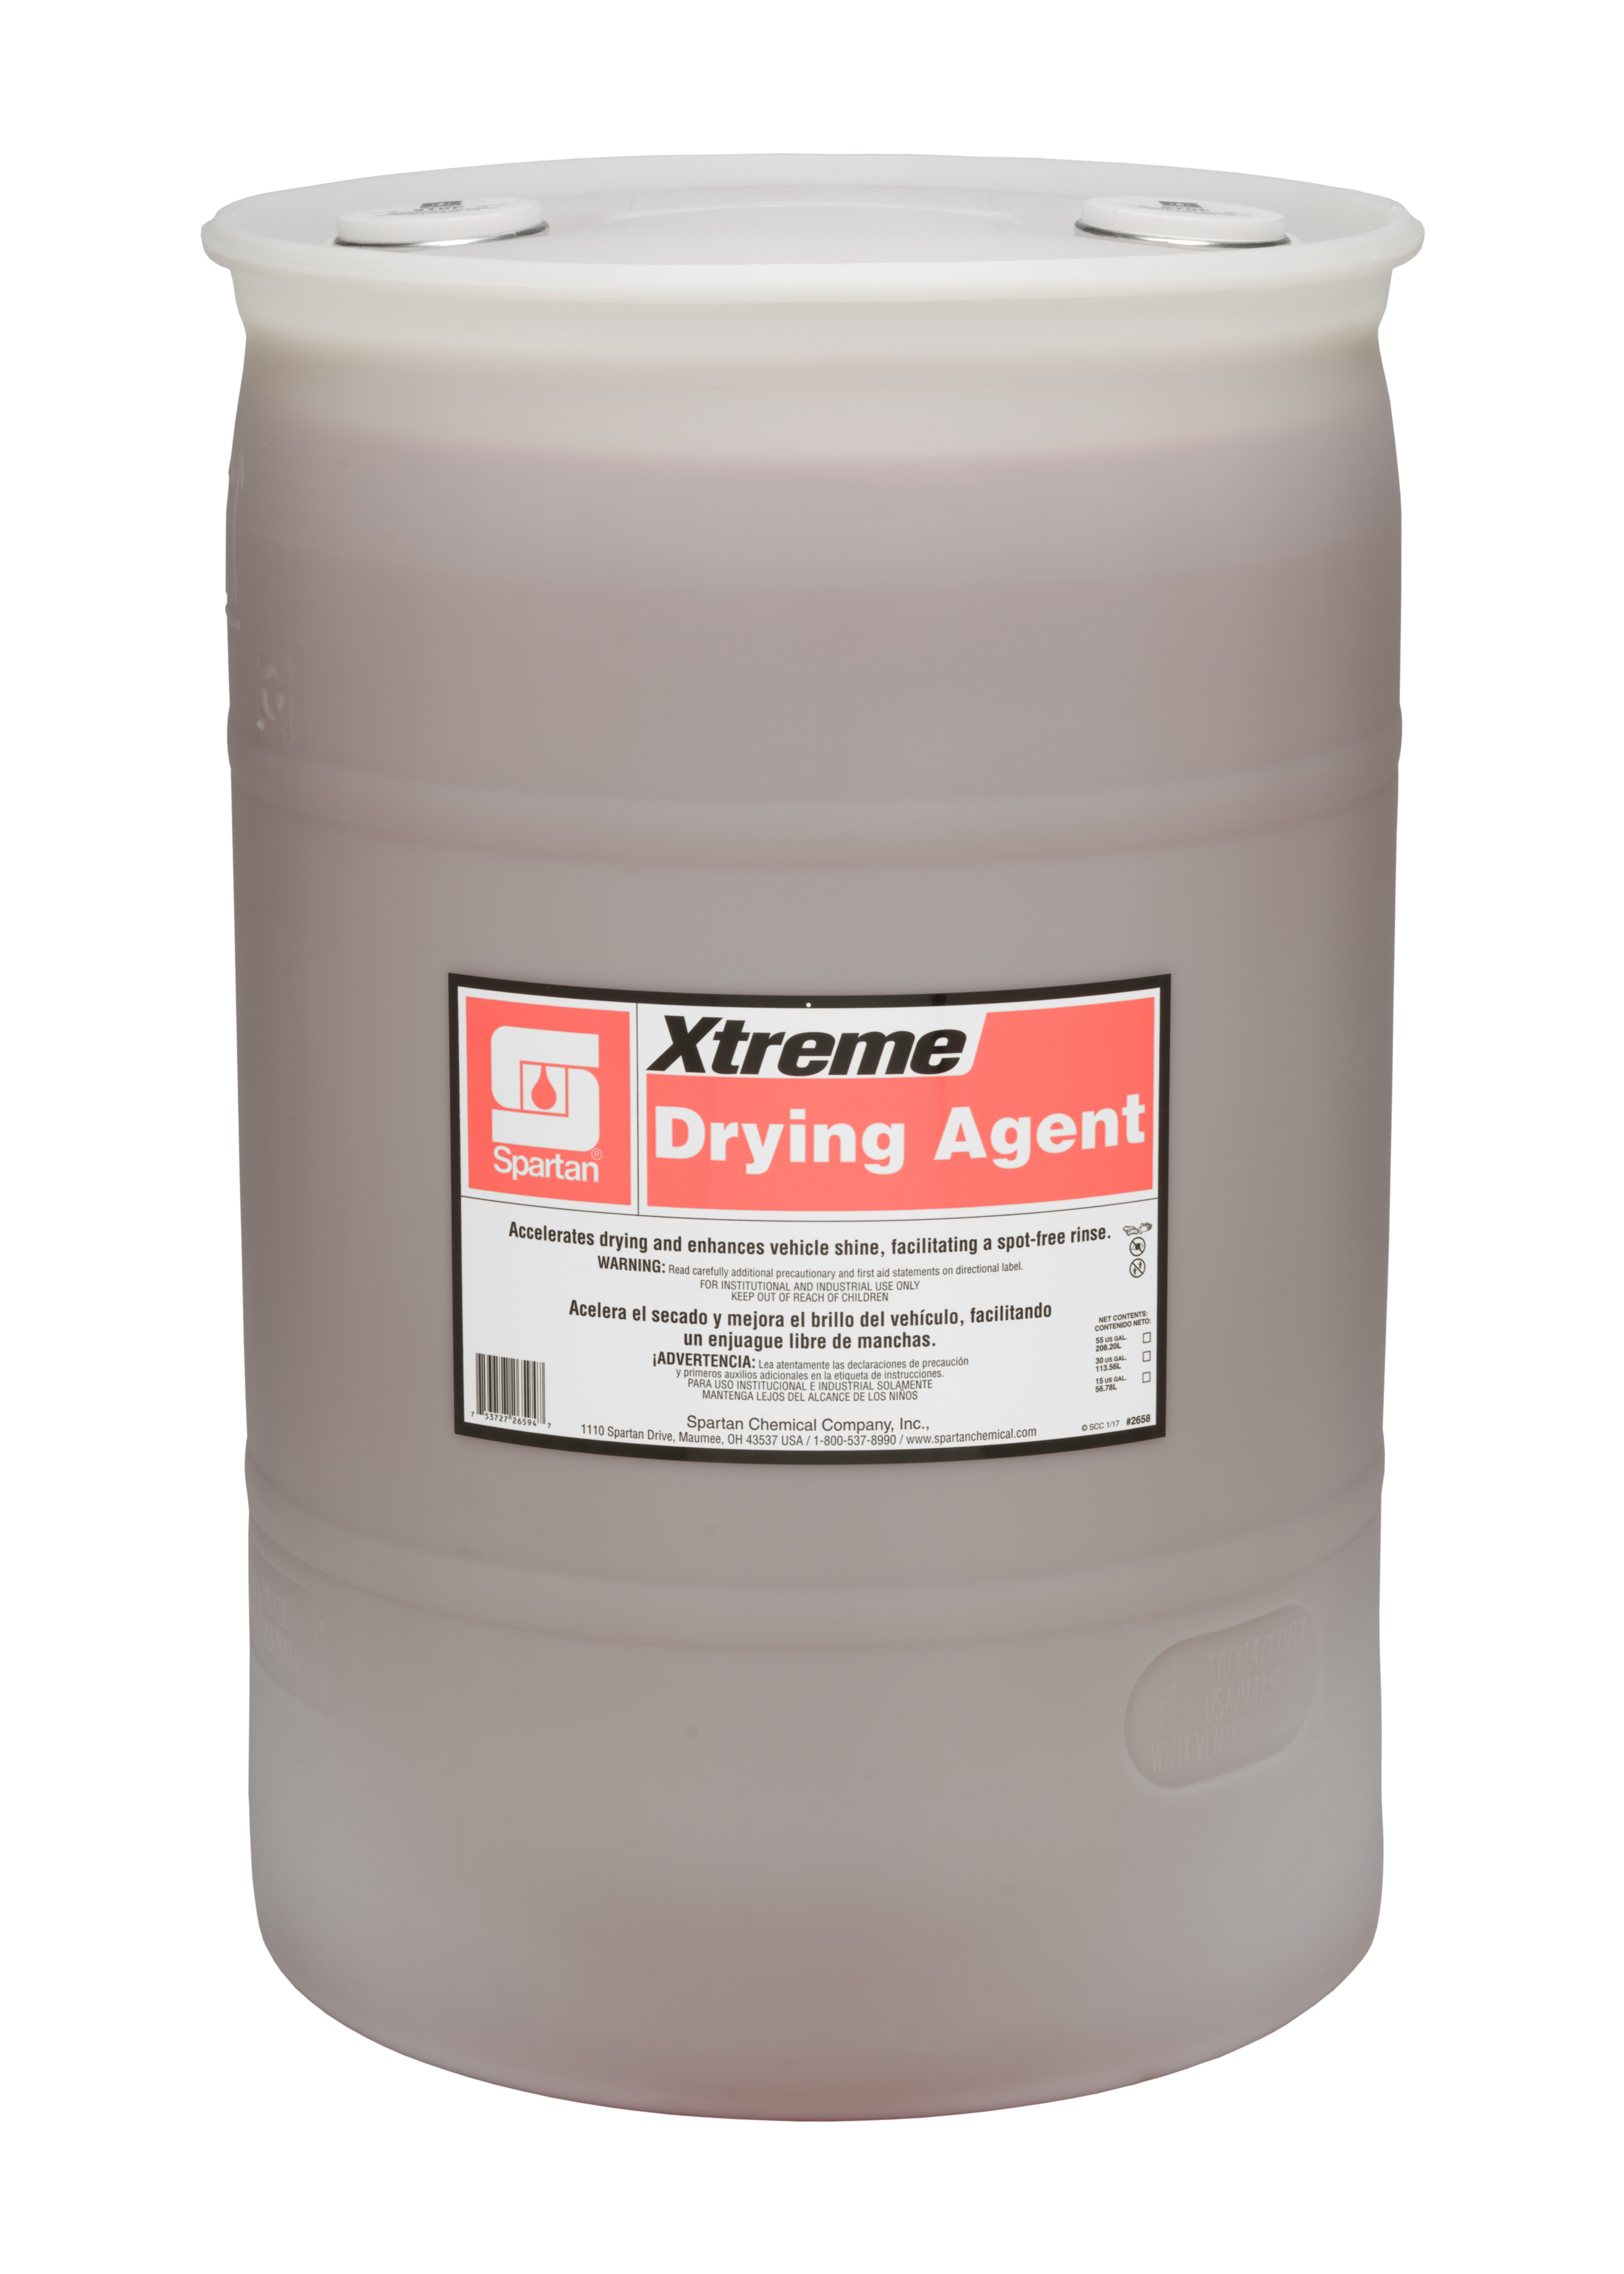 Spartan Chemical Company Xtreme Drying Agent, 30 GAL DRUM